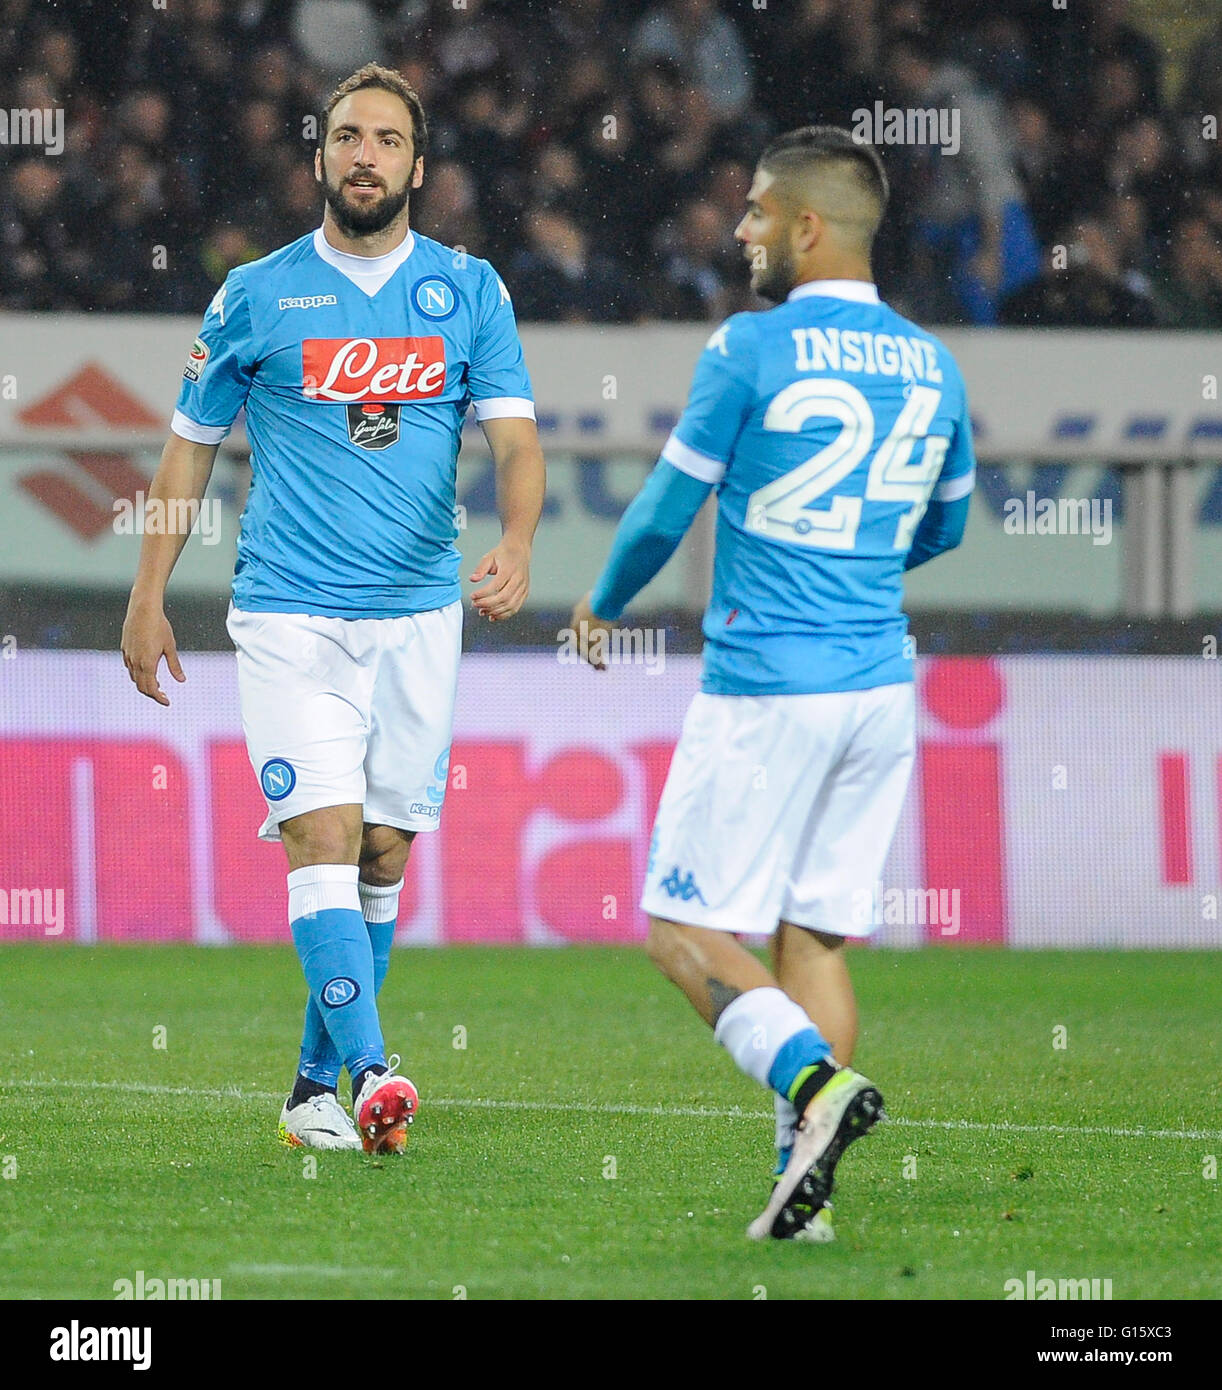 Turin, Italy. 8 may, 2016: Gonzalo Higuain (left) and Lorenzo Insigne during the Serie A football match between Torino FC and SSC Napoli Credit:  Nicolò Campo/Alamy Live News Stock Photo